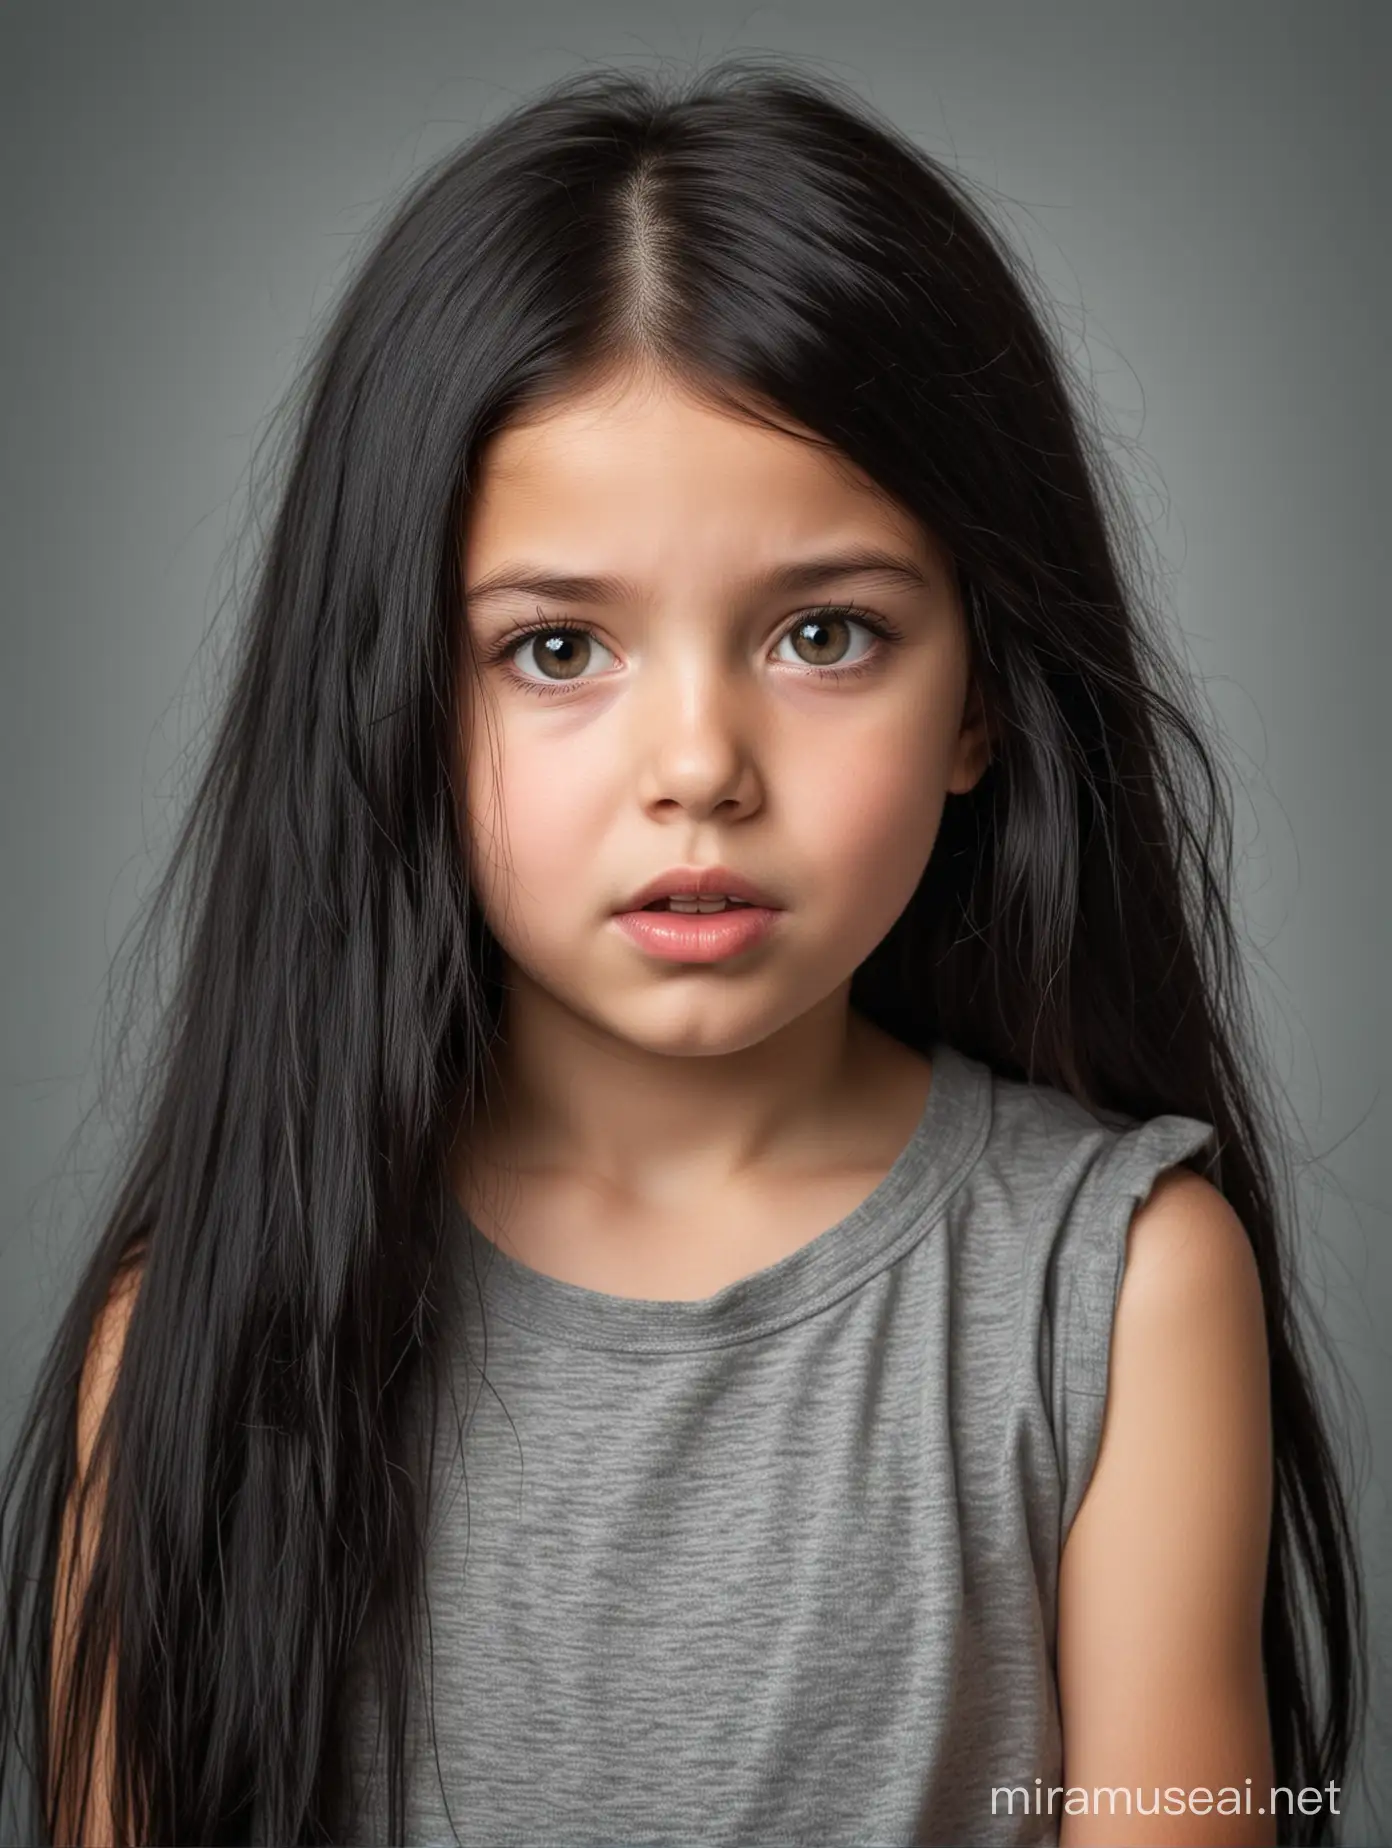 Surprised Little Girl with Long Black Hair